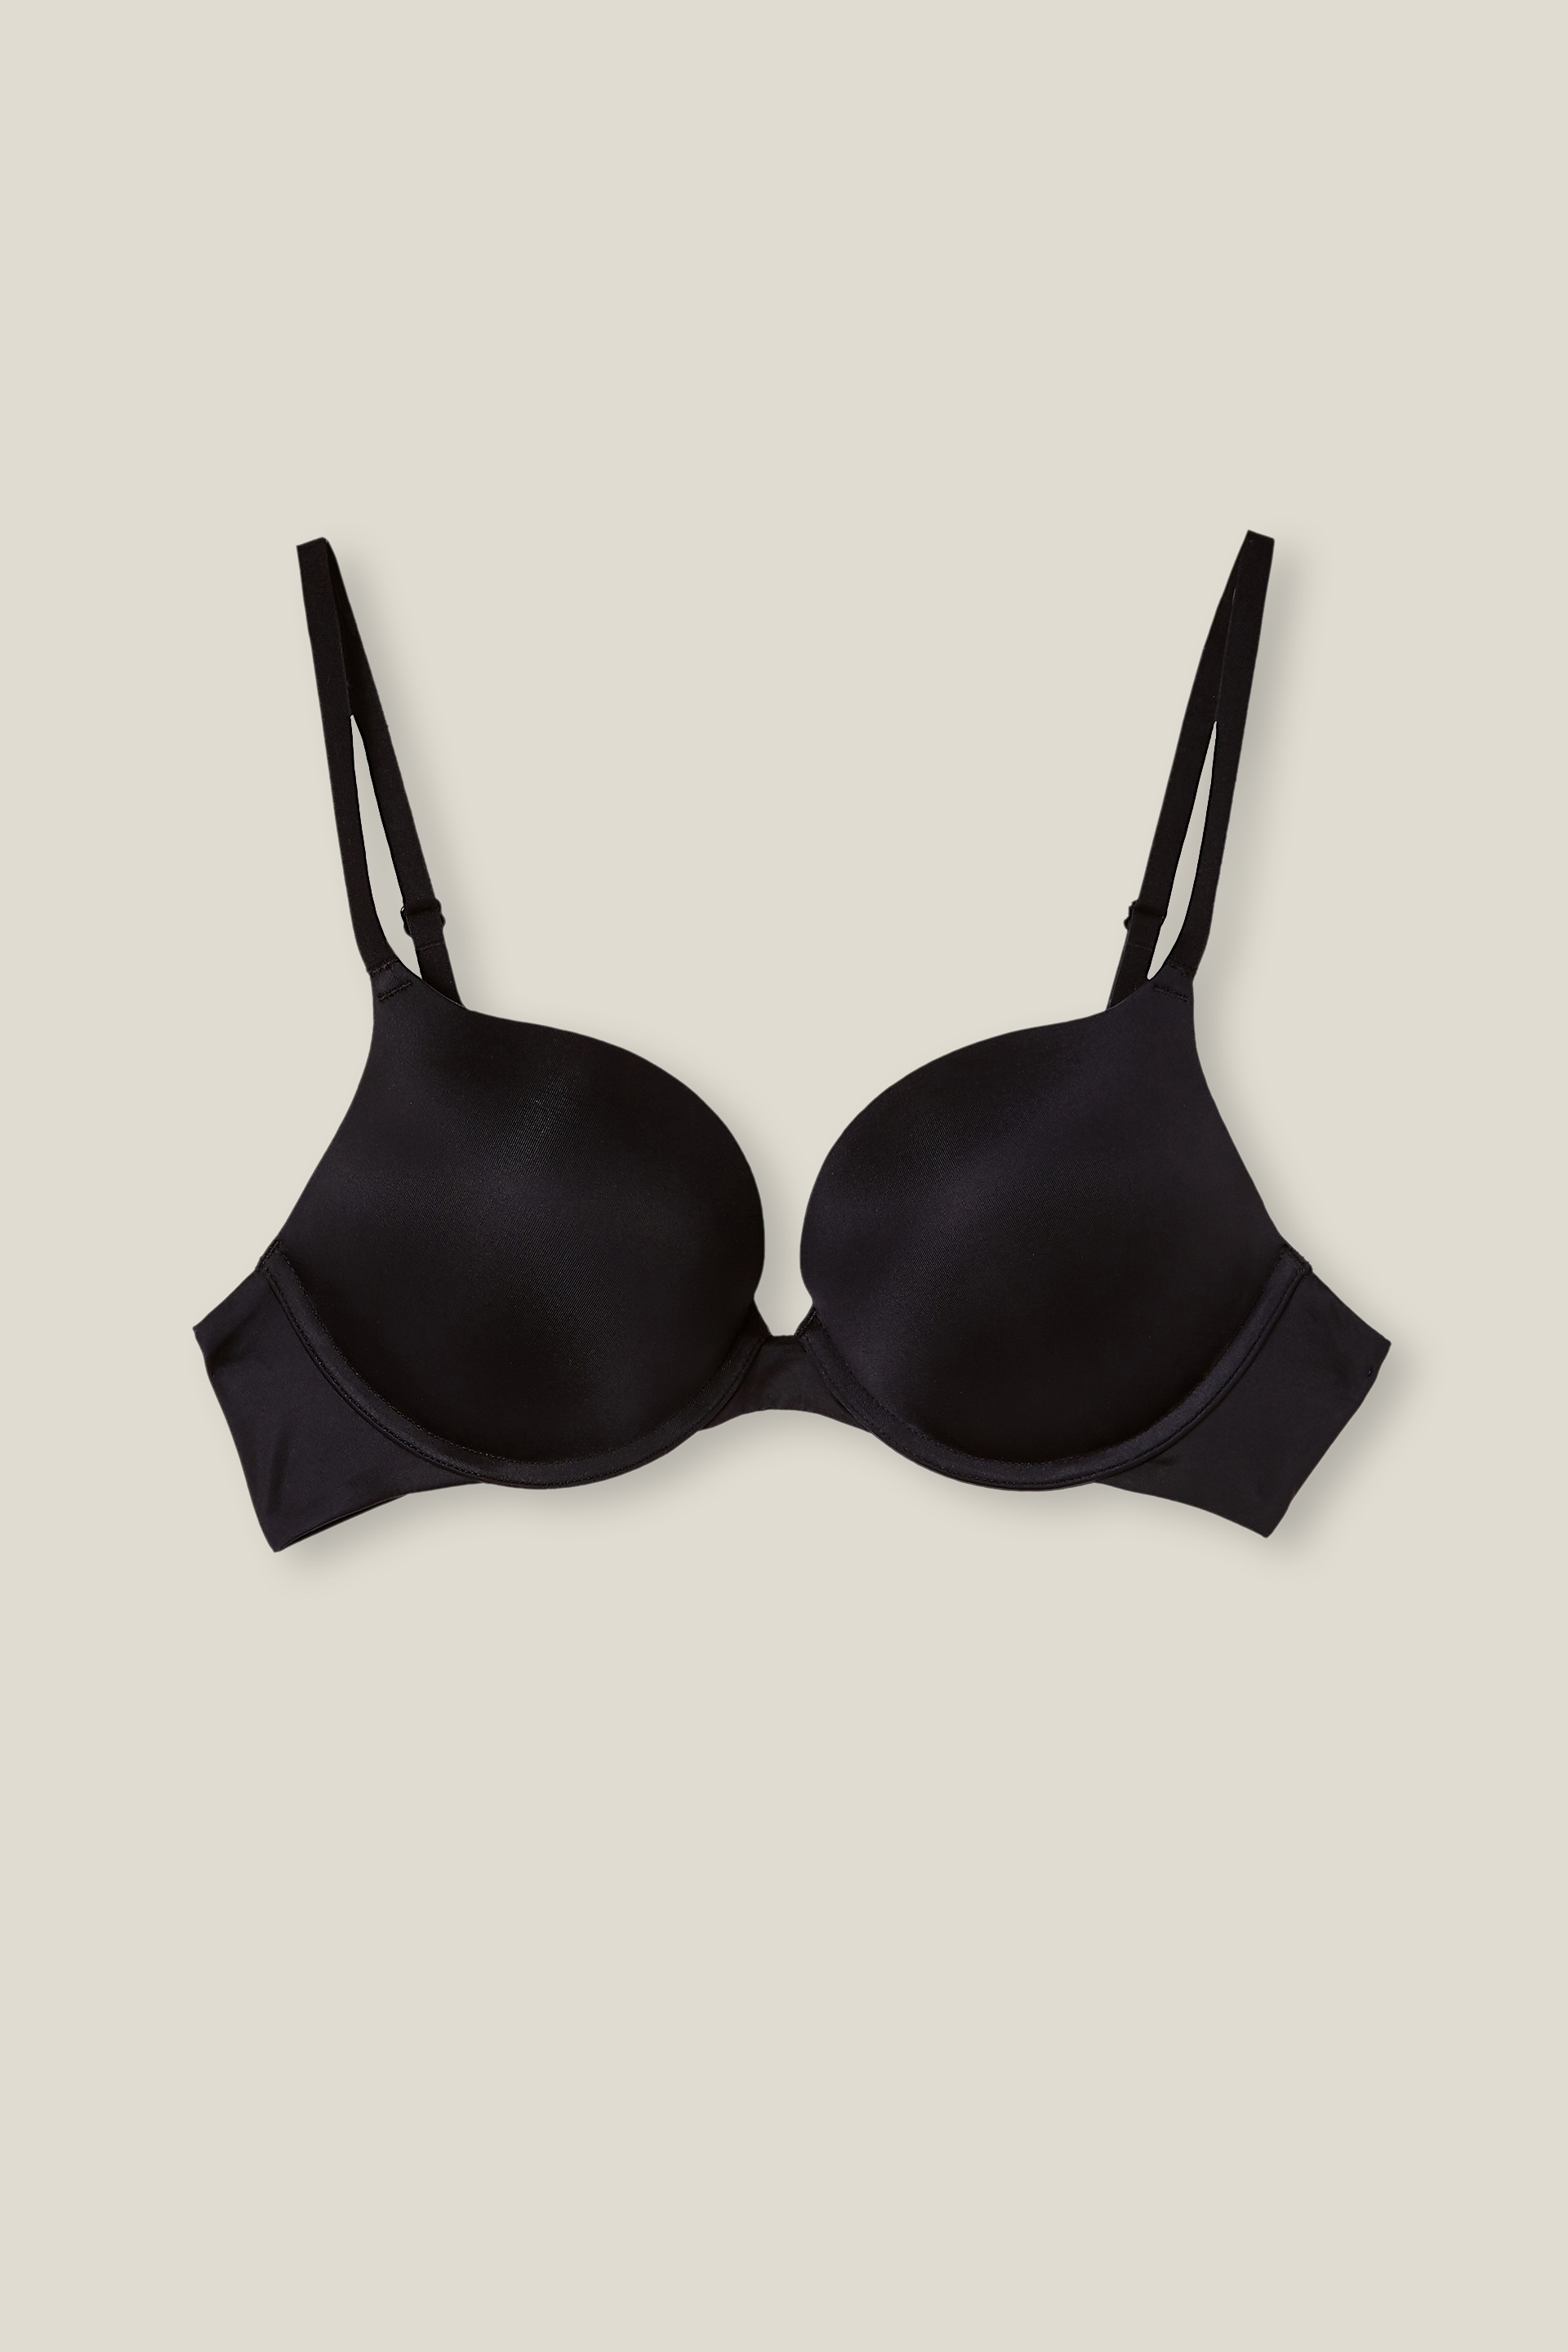 Shop Cotton:On Women's Padded Bras up to 60% Off